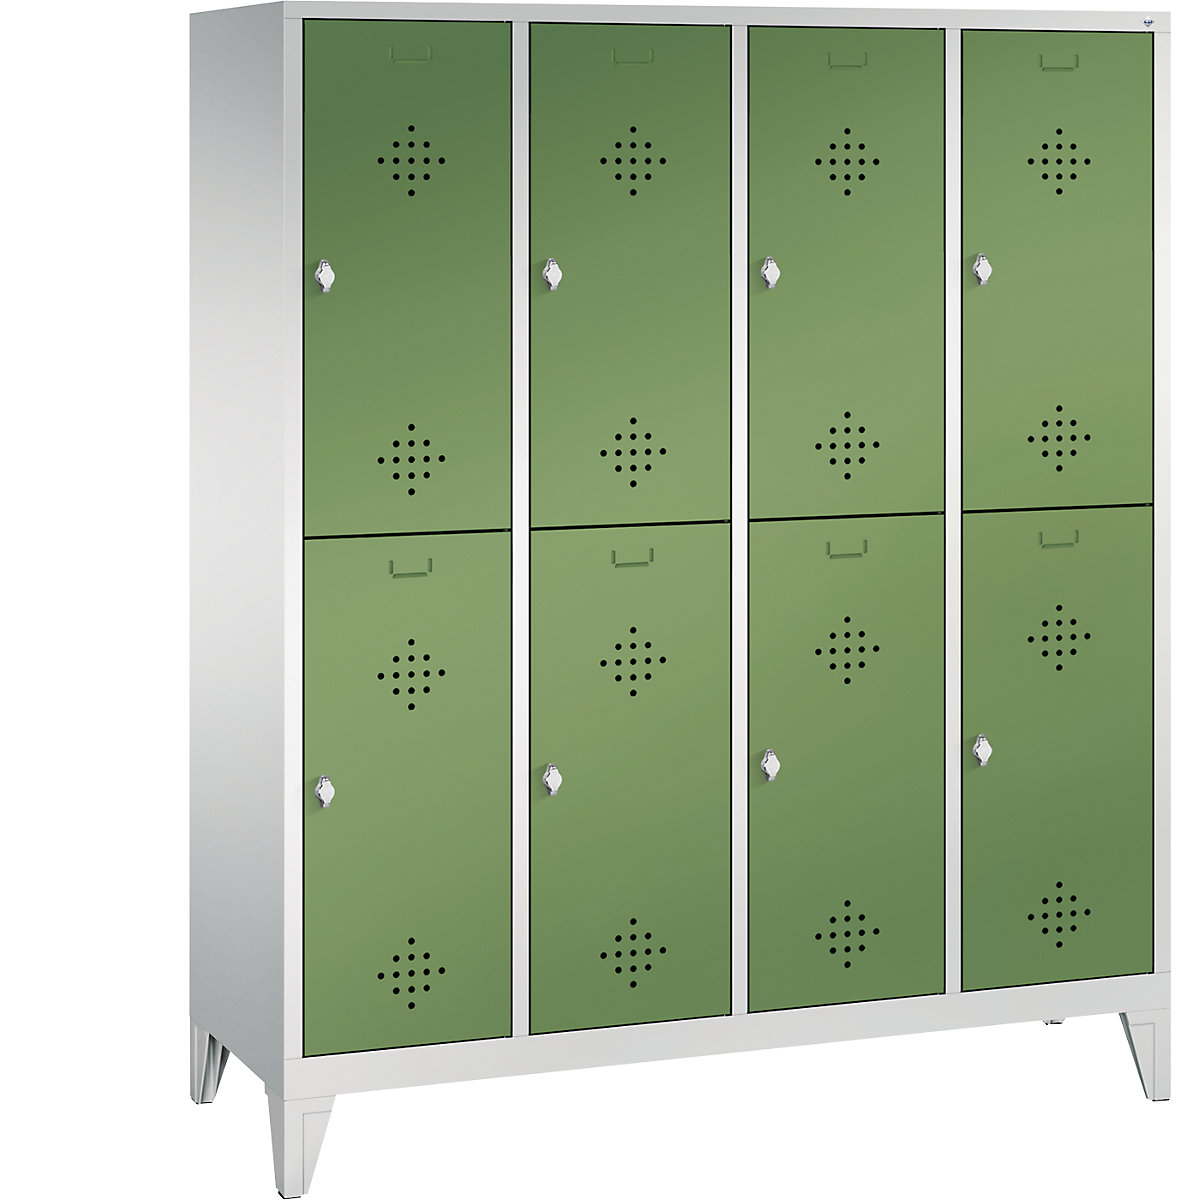 CLASSIC cloakroom locker with feet, double tier – C+P, 4 compartments, 2 shelf compartments each, compartment width 400 mm, light grey / reseda green-6